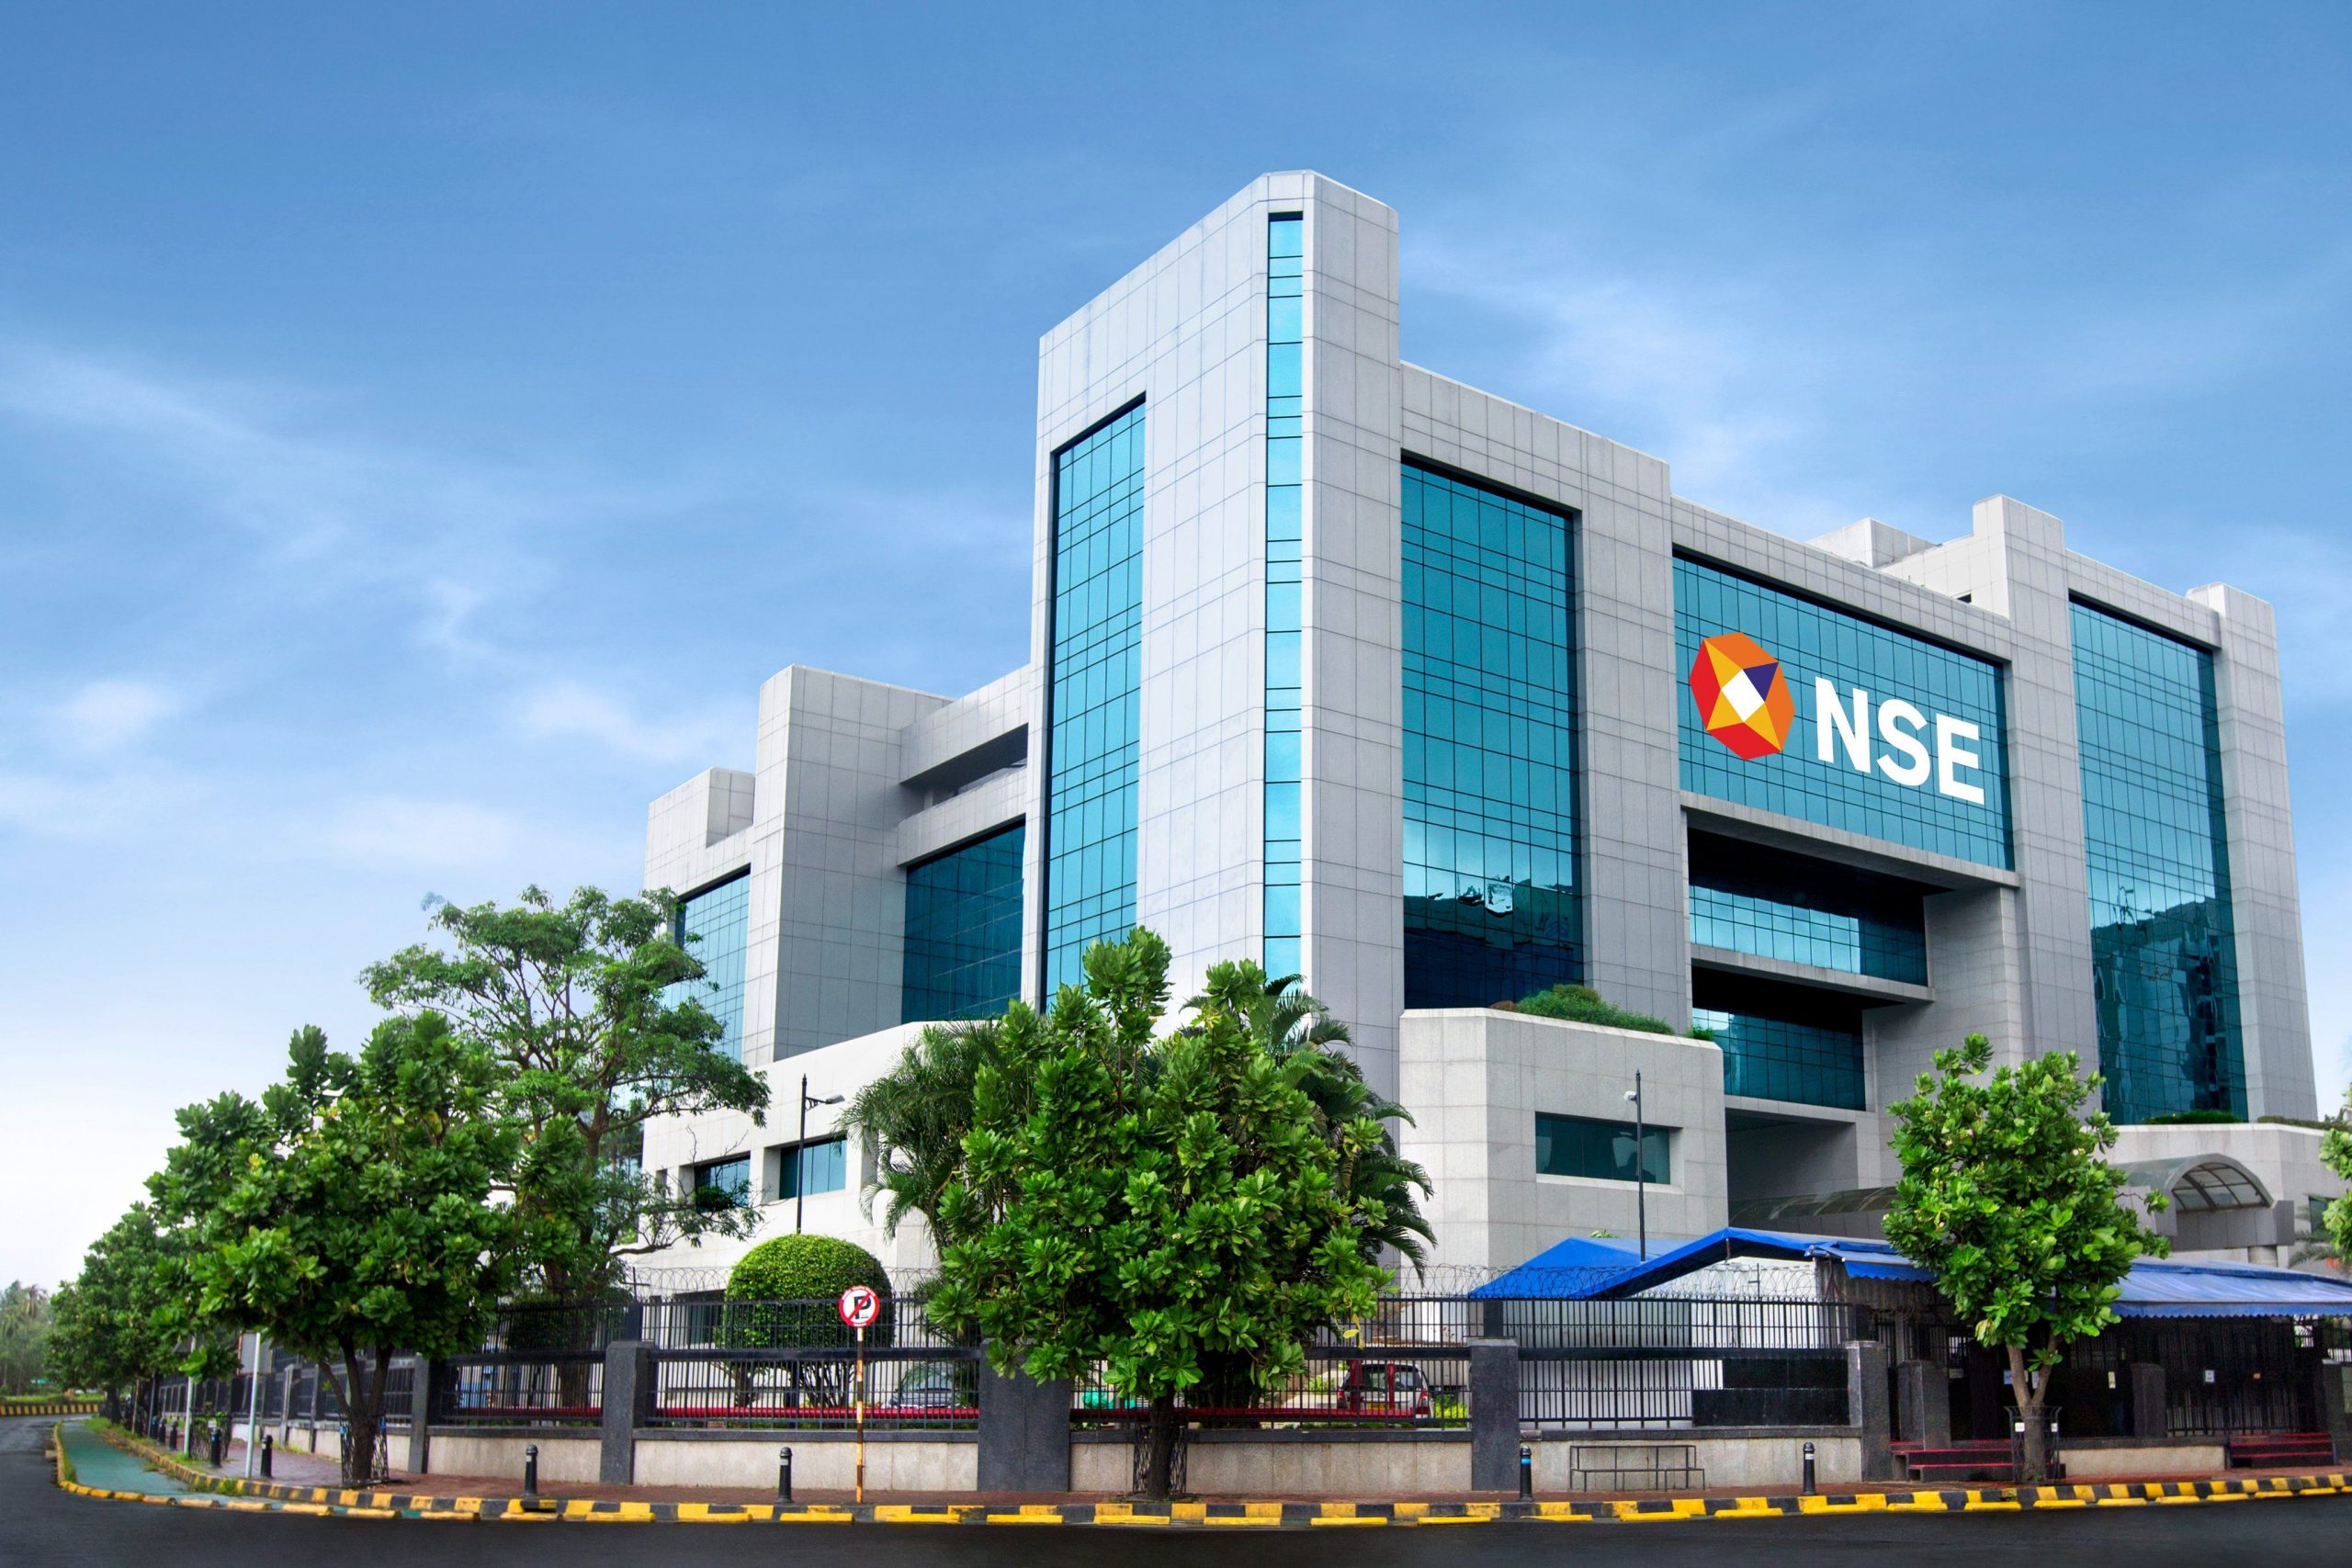 NSE F&O Ban: RBL Bank and others under ban on Tuesday, June 14, 2022